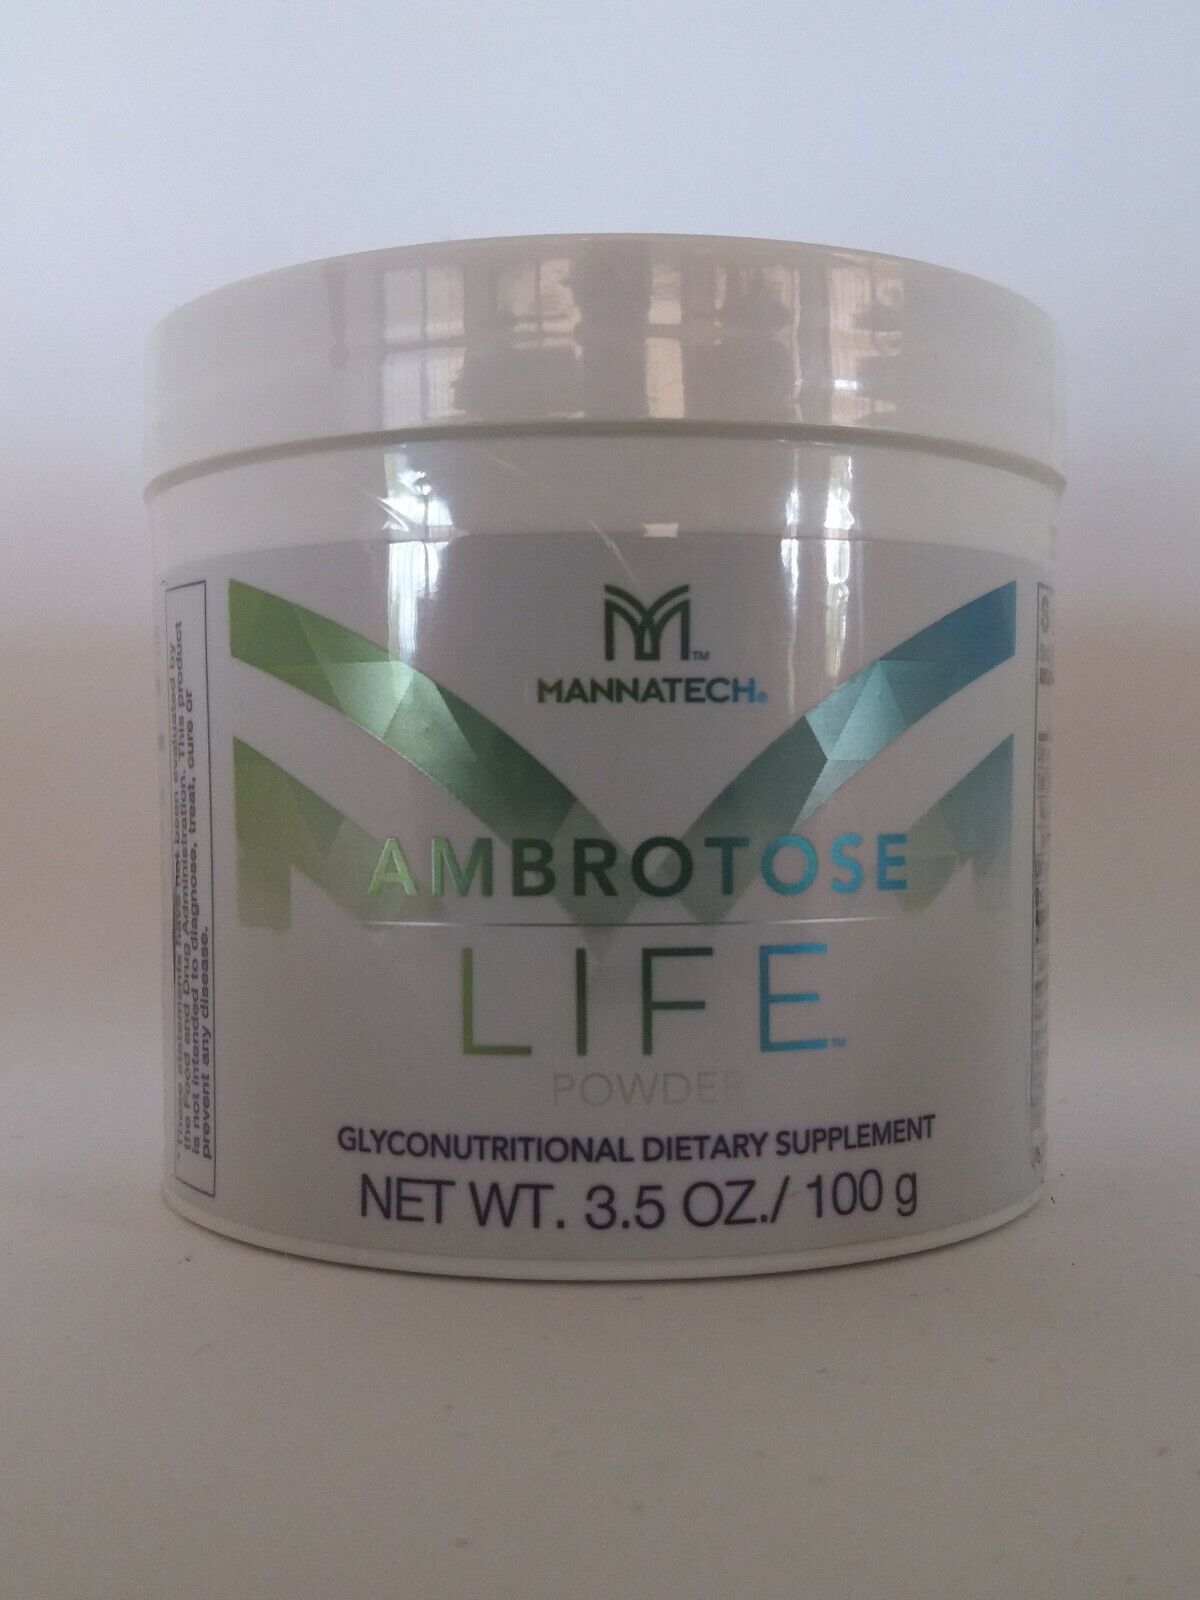 4 Cans Mannatech Ambrotose LIFE 100g Canister Pure Glyconutrient Supplement NEW